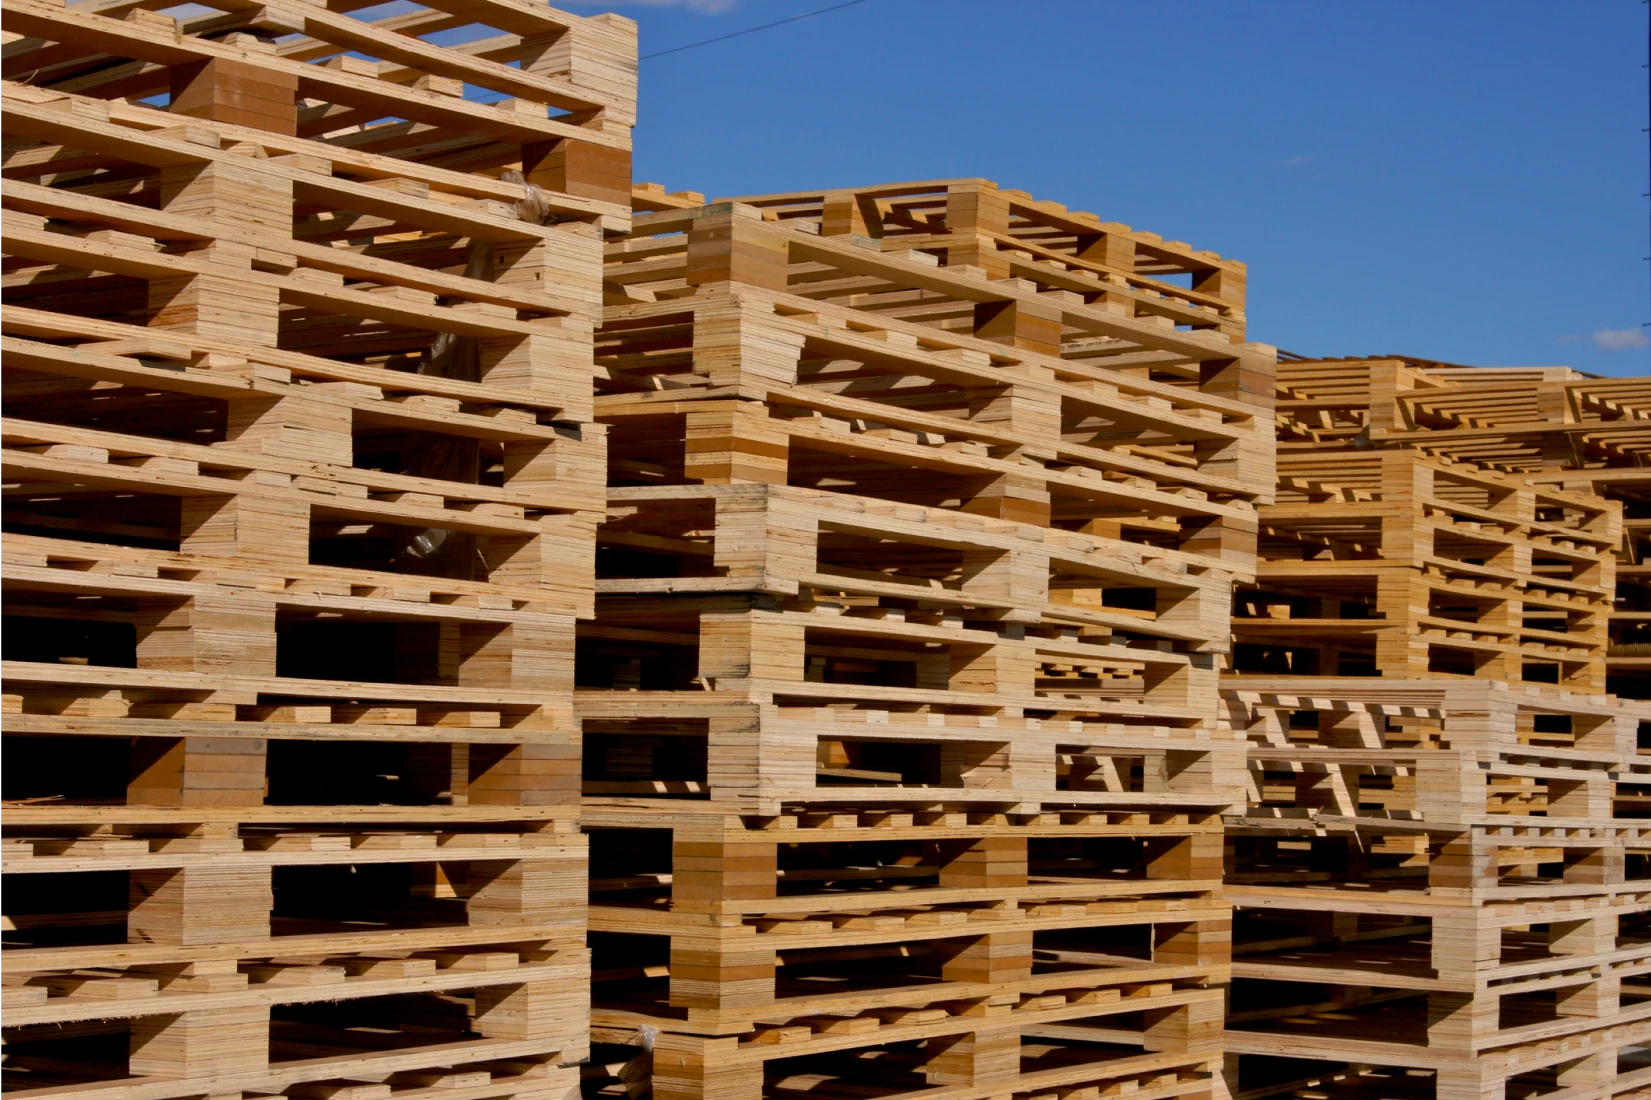 Pallets stacked outside